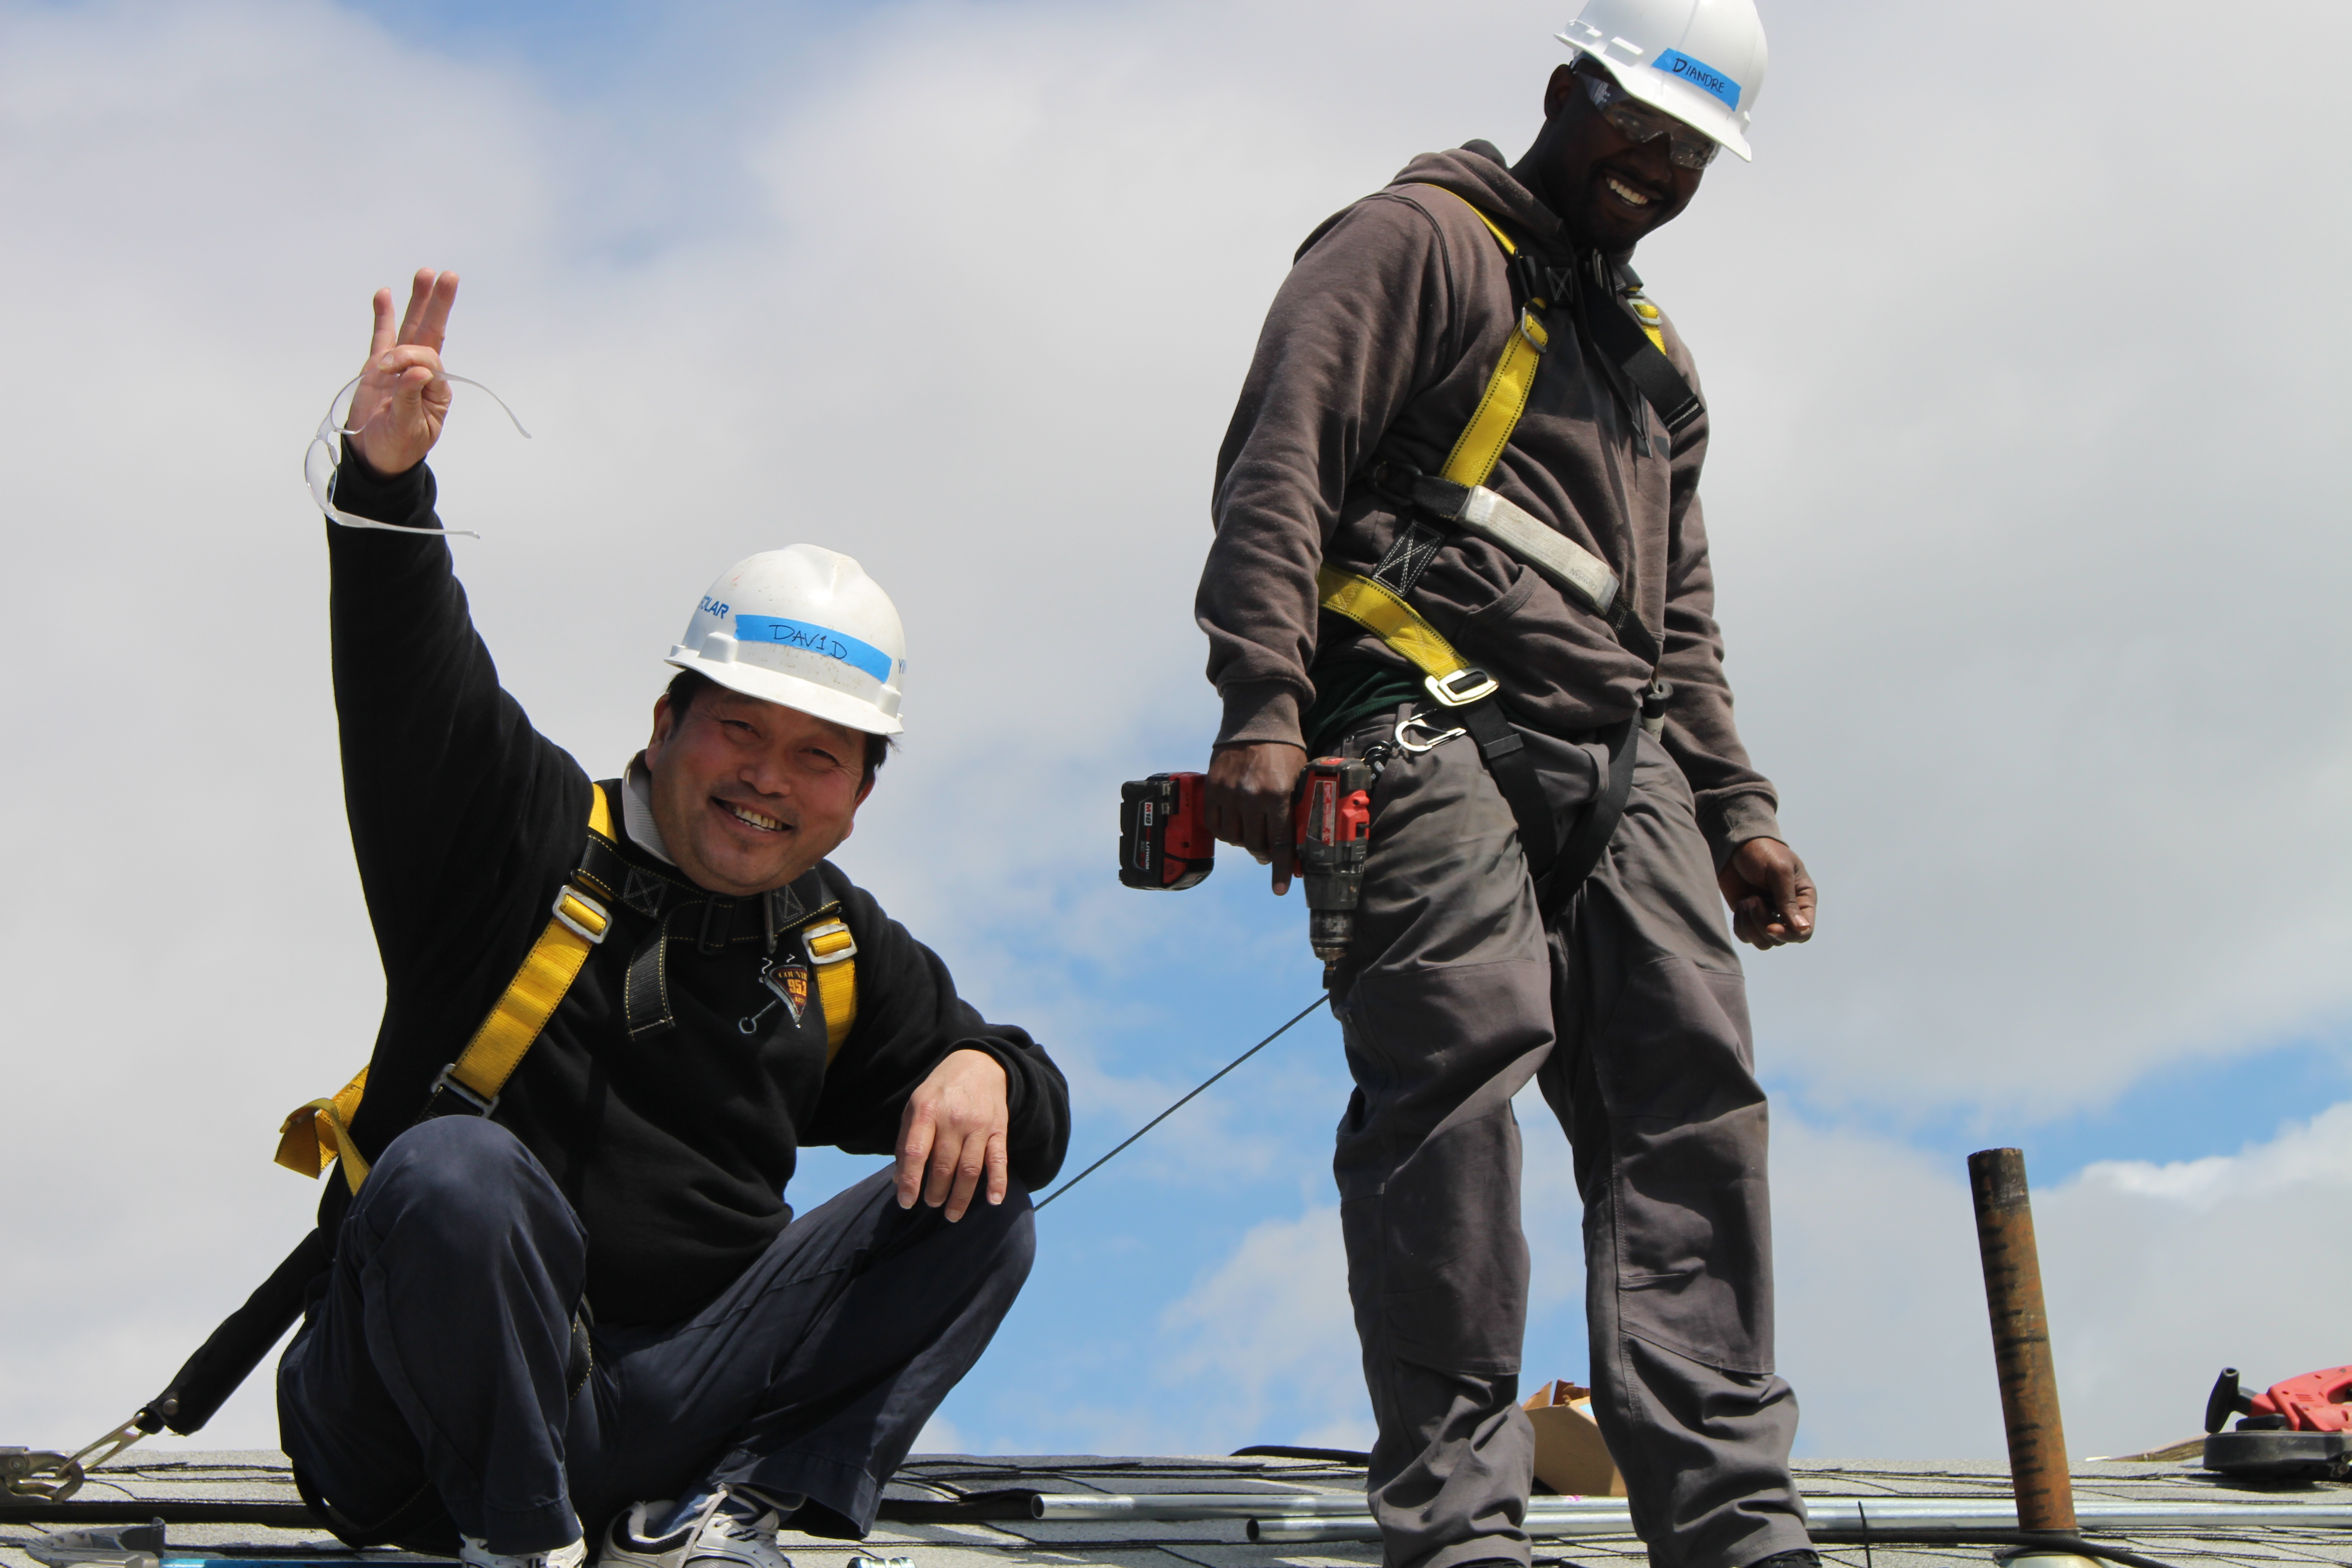 One hispanic and one african american males, on a roof wearing hardhats. One man is waving and the other man is holding a drill. Both are wearing saftey harnesses and smiling.